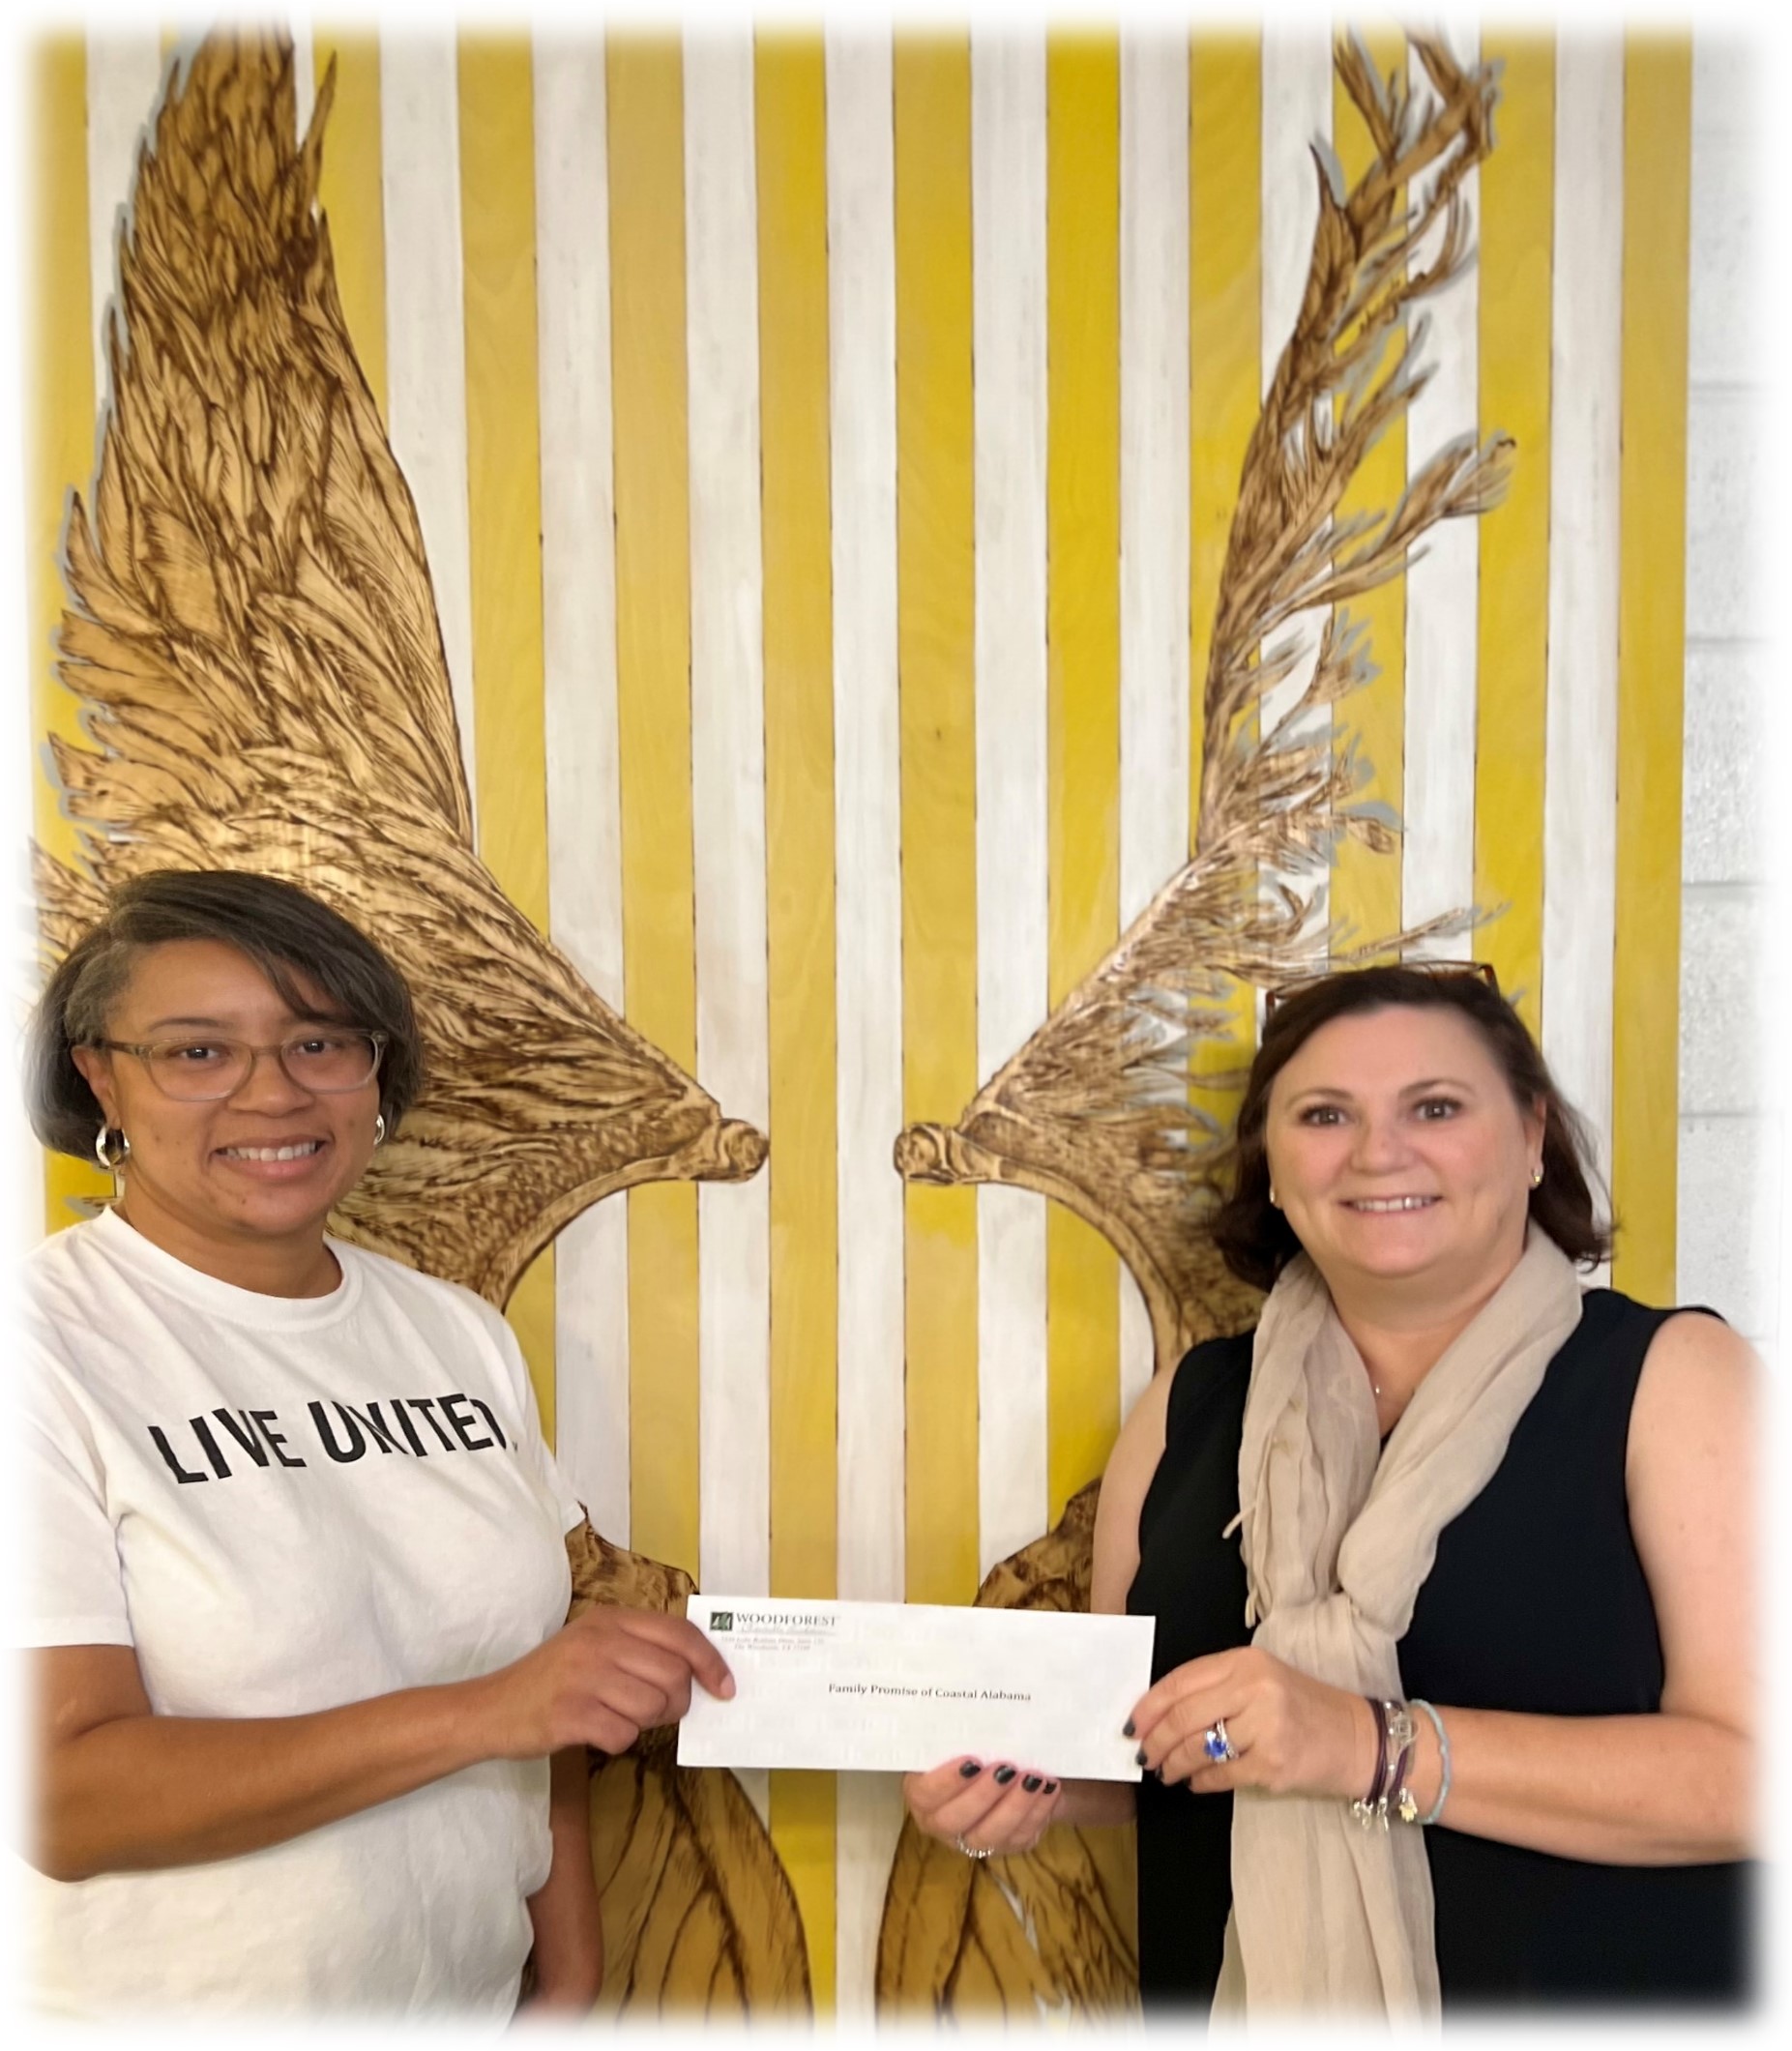 Family Promise of Coastal Alabama received a donation from WCF.